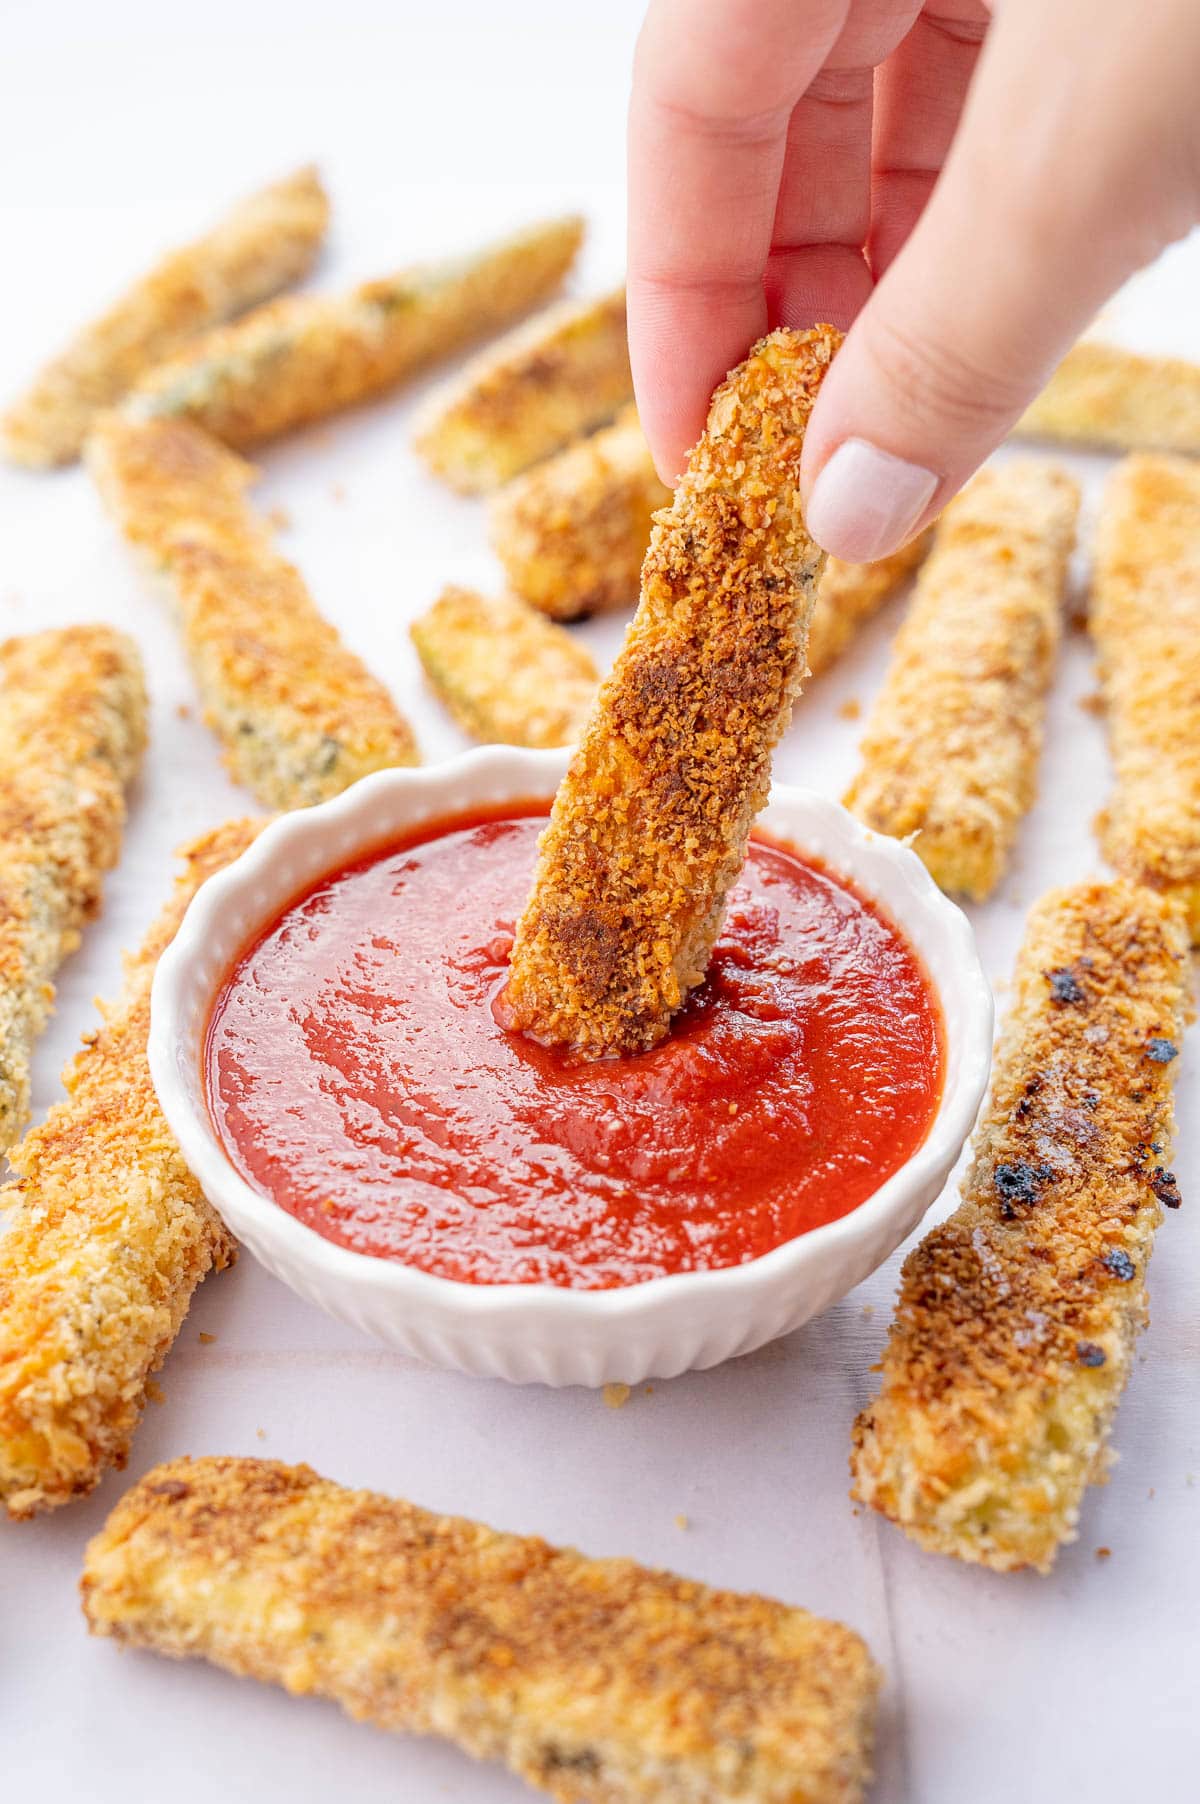 Zucchini fry is being dipped in marinara sauce. More zucchini fries scattered around.